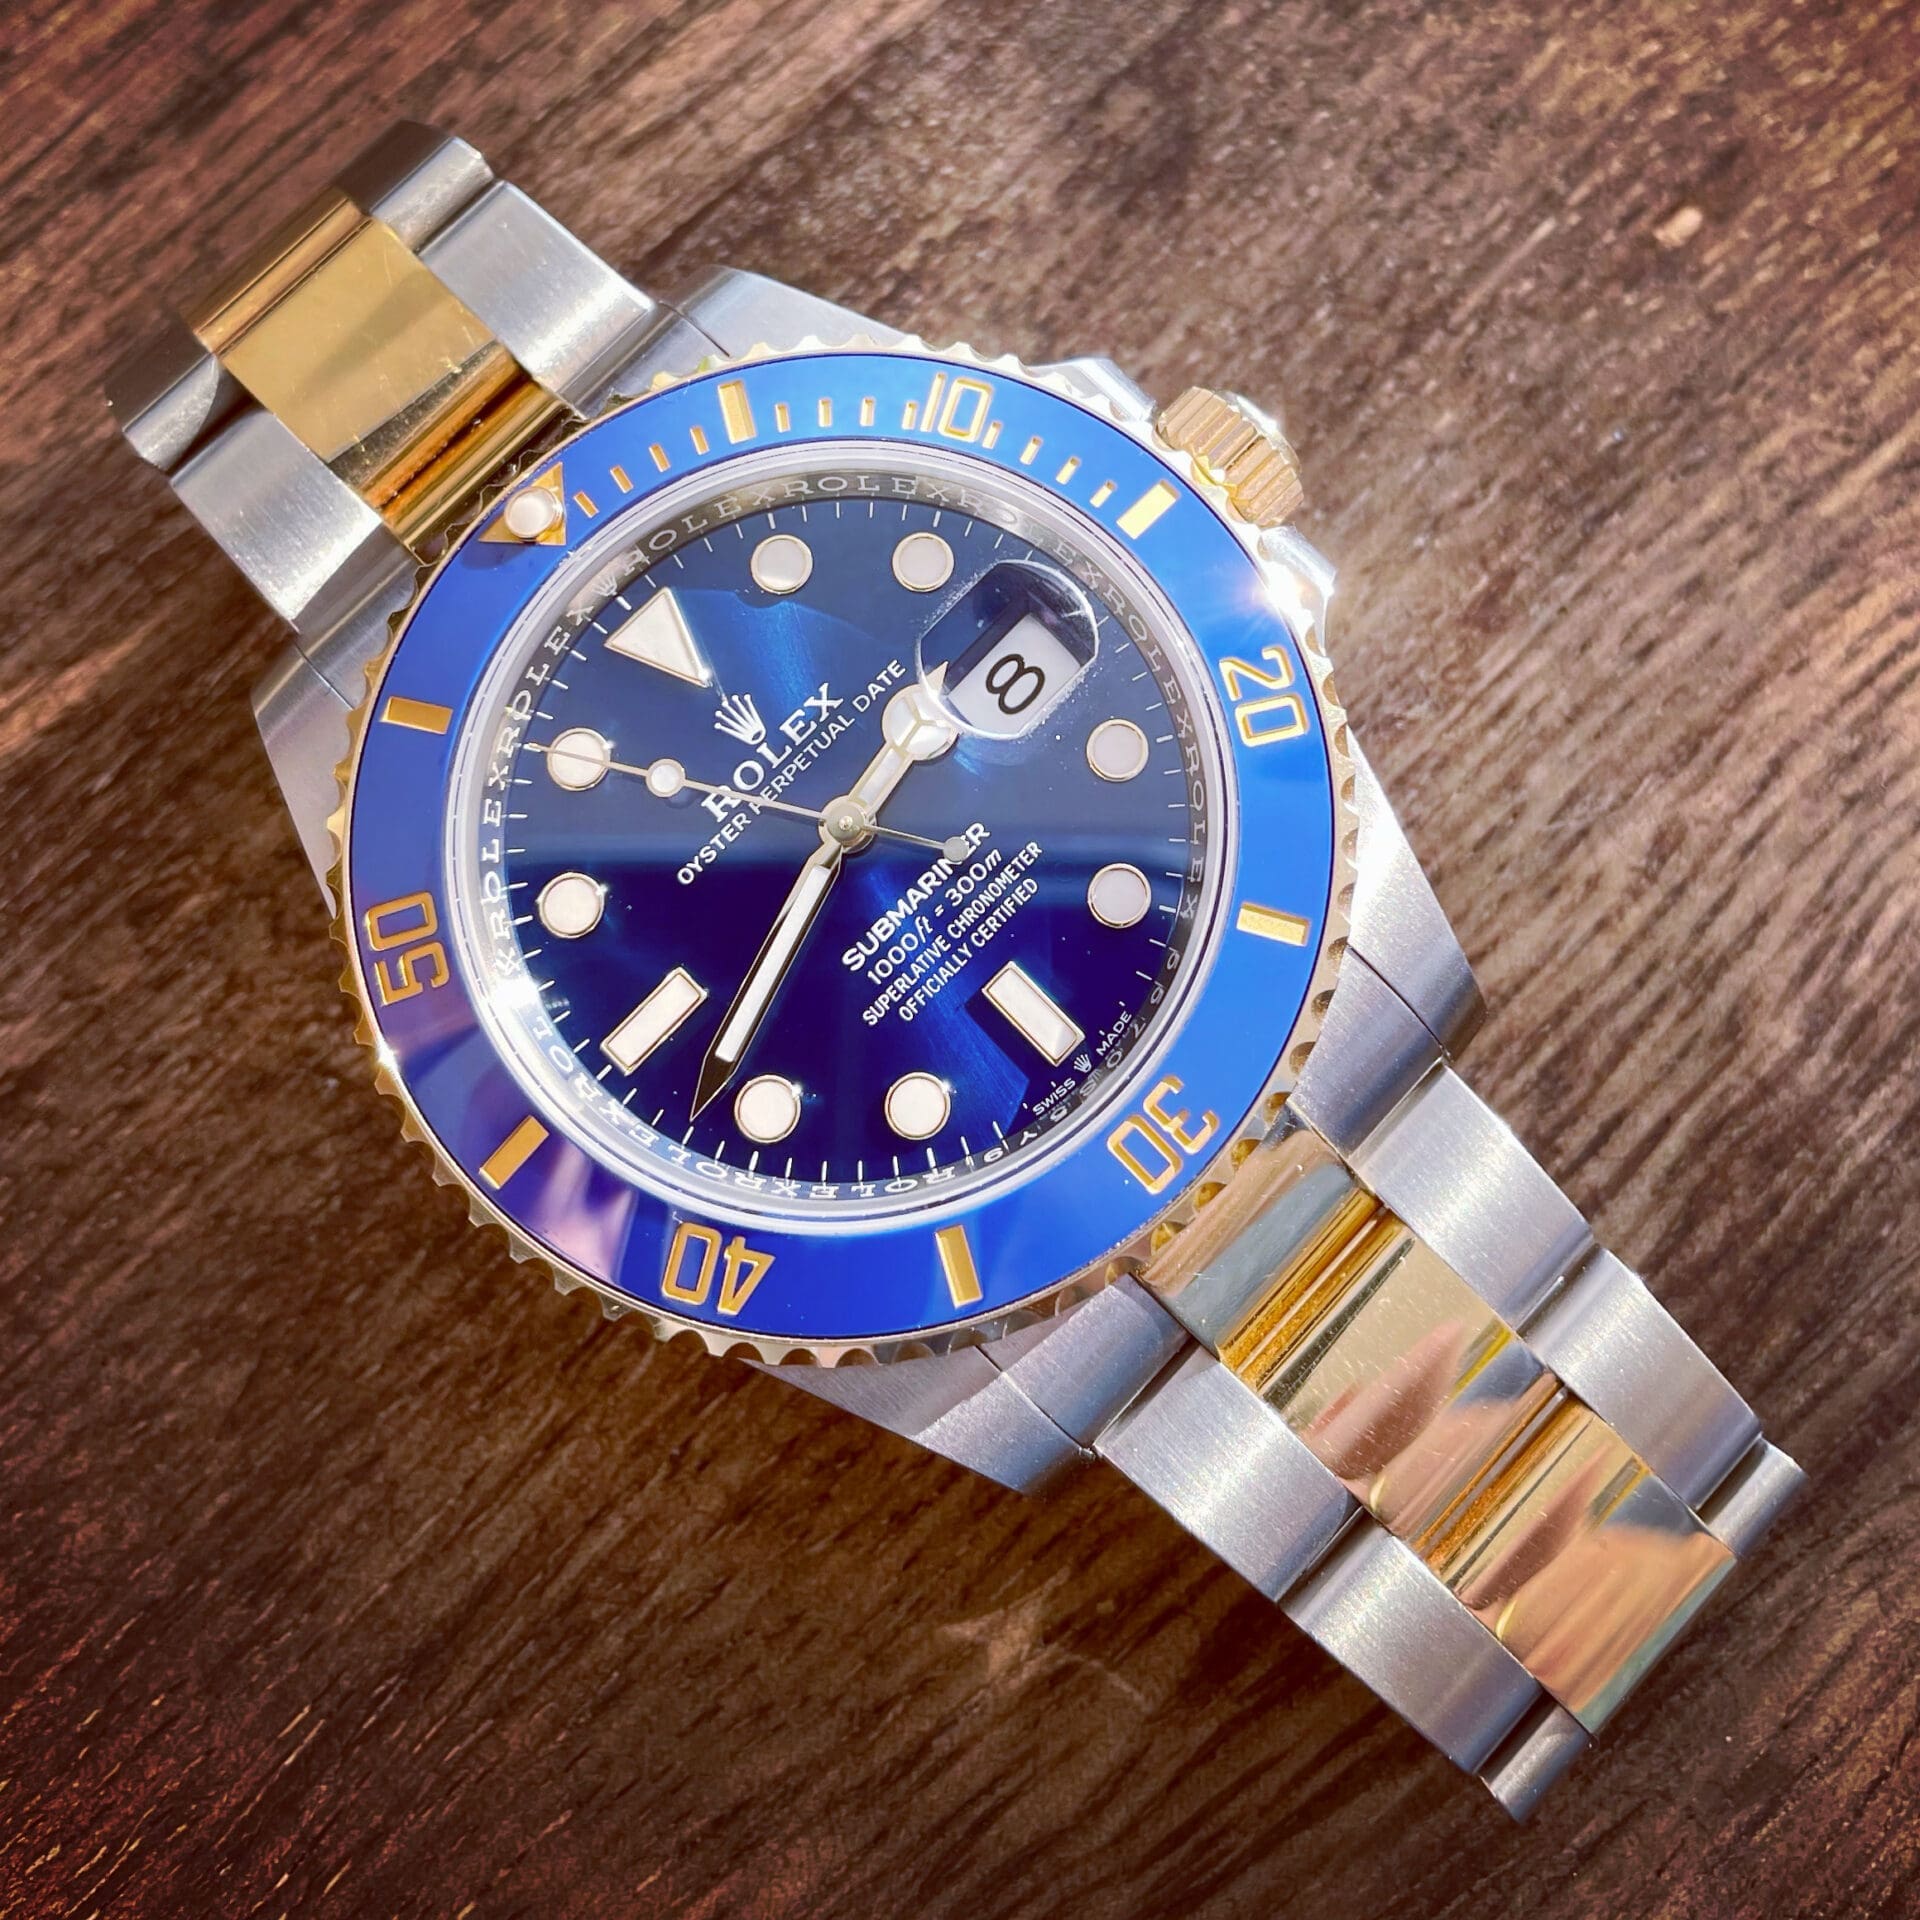 Why I fell for two-tone and bought the Rolex Submariner 126613LB